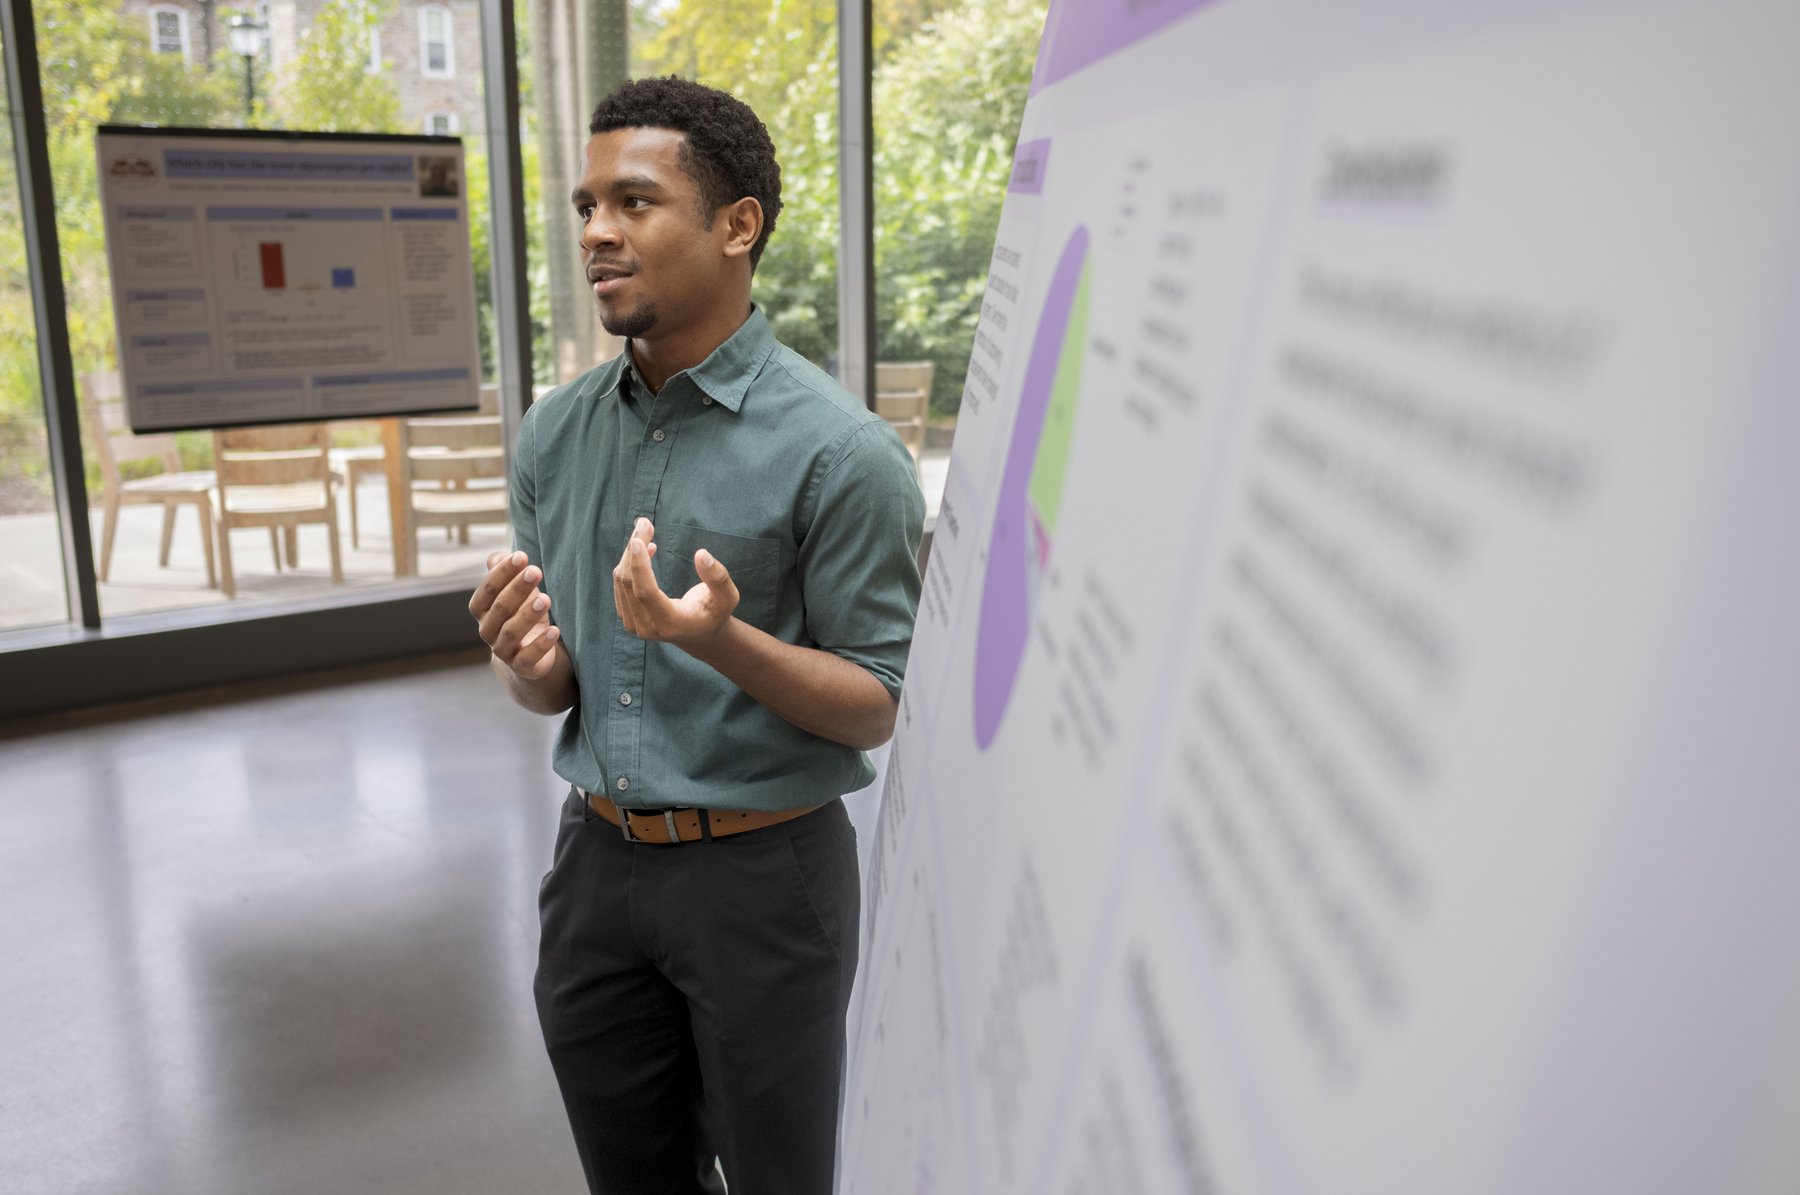 Summer Scholar student presenting research poster